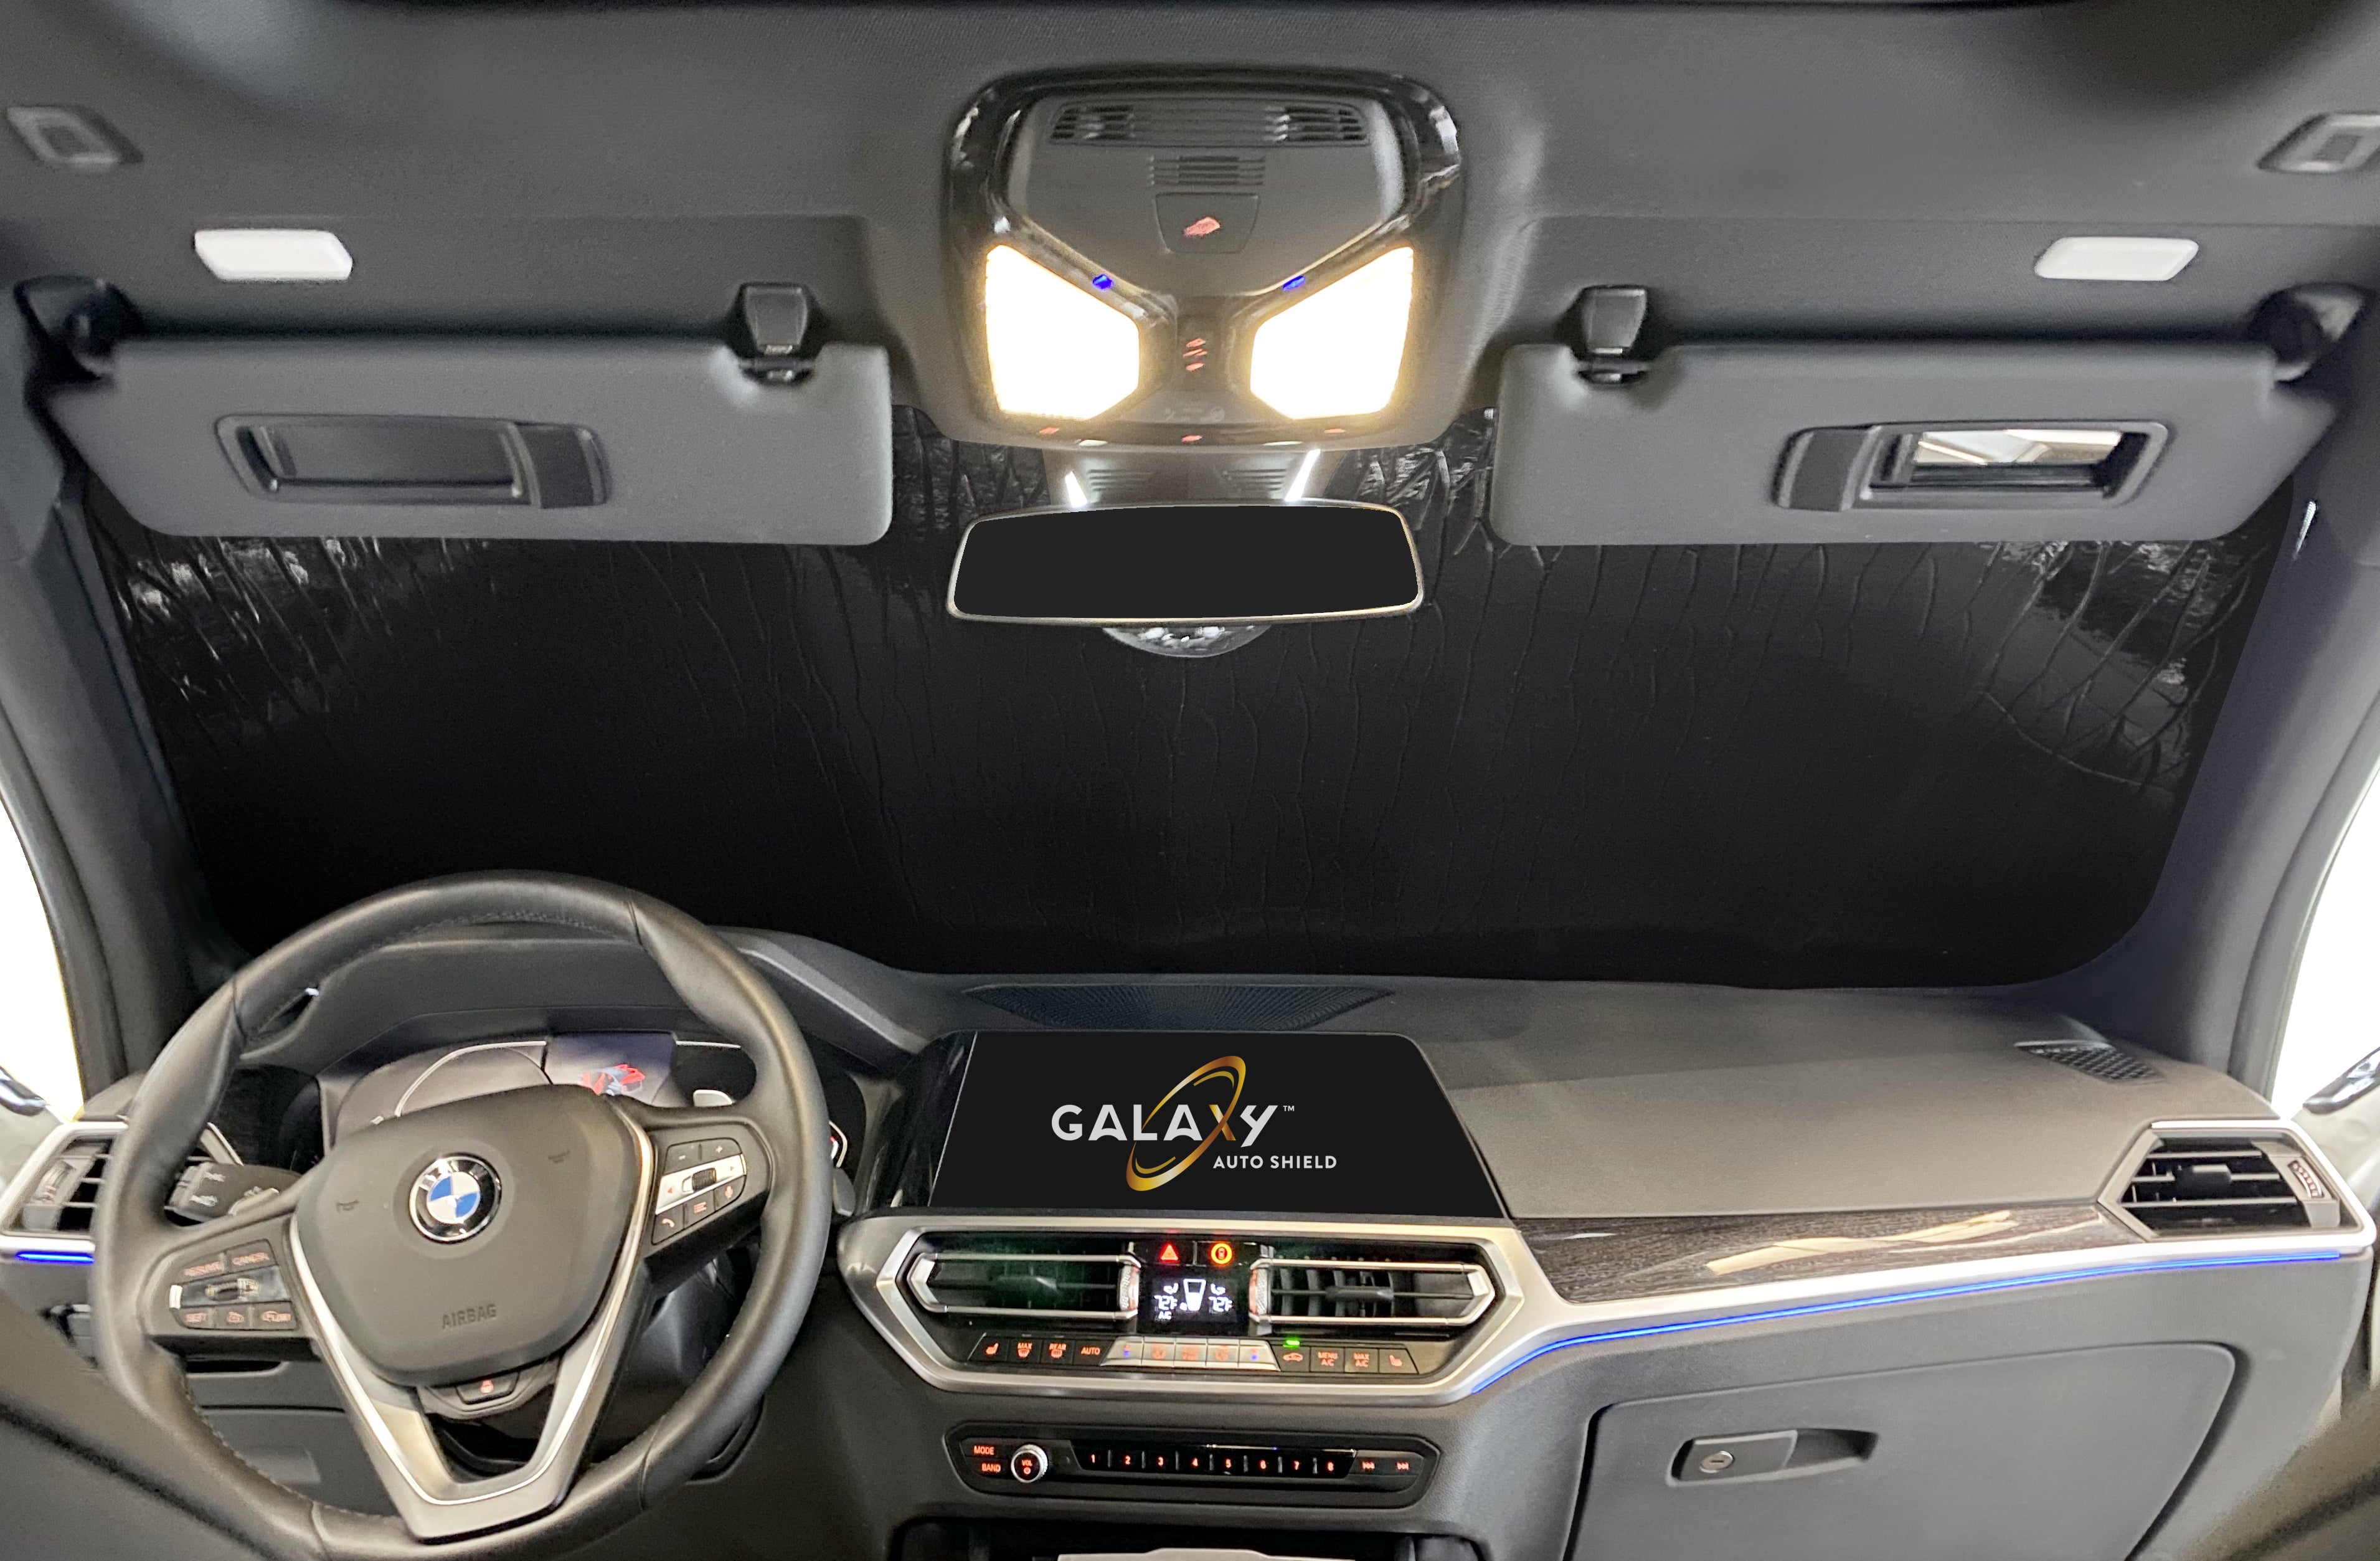 Sunshades for 2019-2023 BMW 3-Series Sedan - 330i Luxury, Sport Line, M Sport, M340i (View for more options)